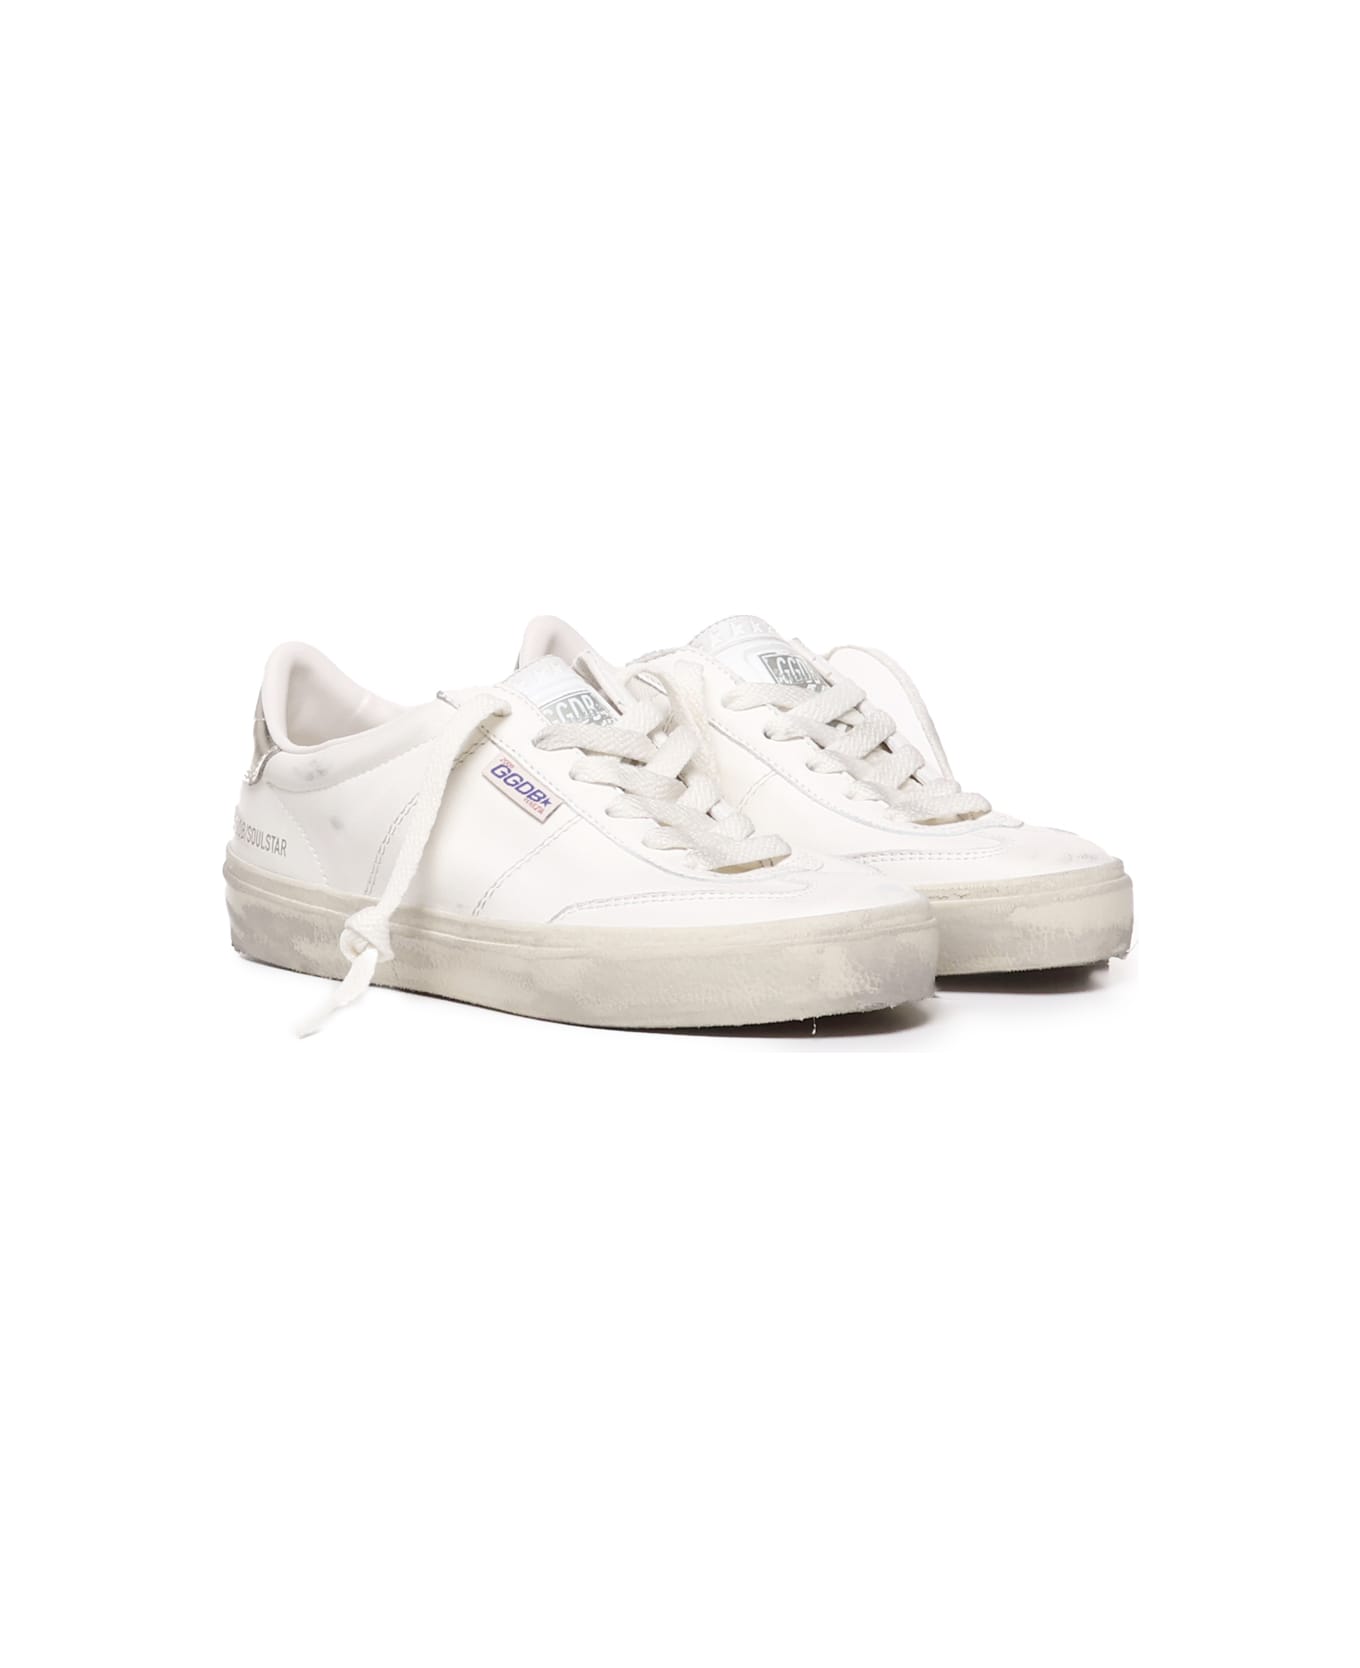 Golden Goose Soul Star Leather Sneakers - WHITE/GOLD